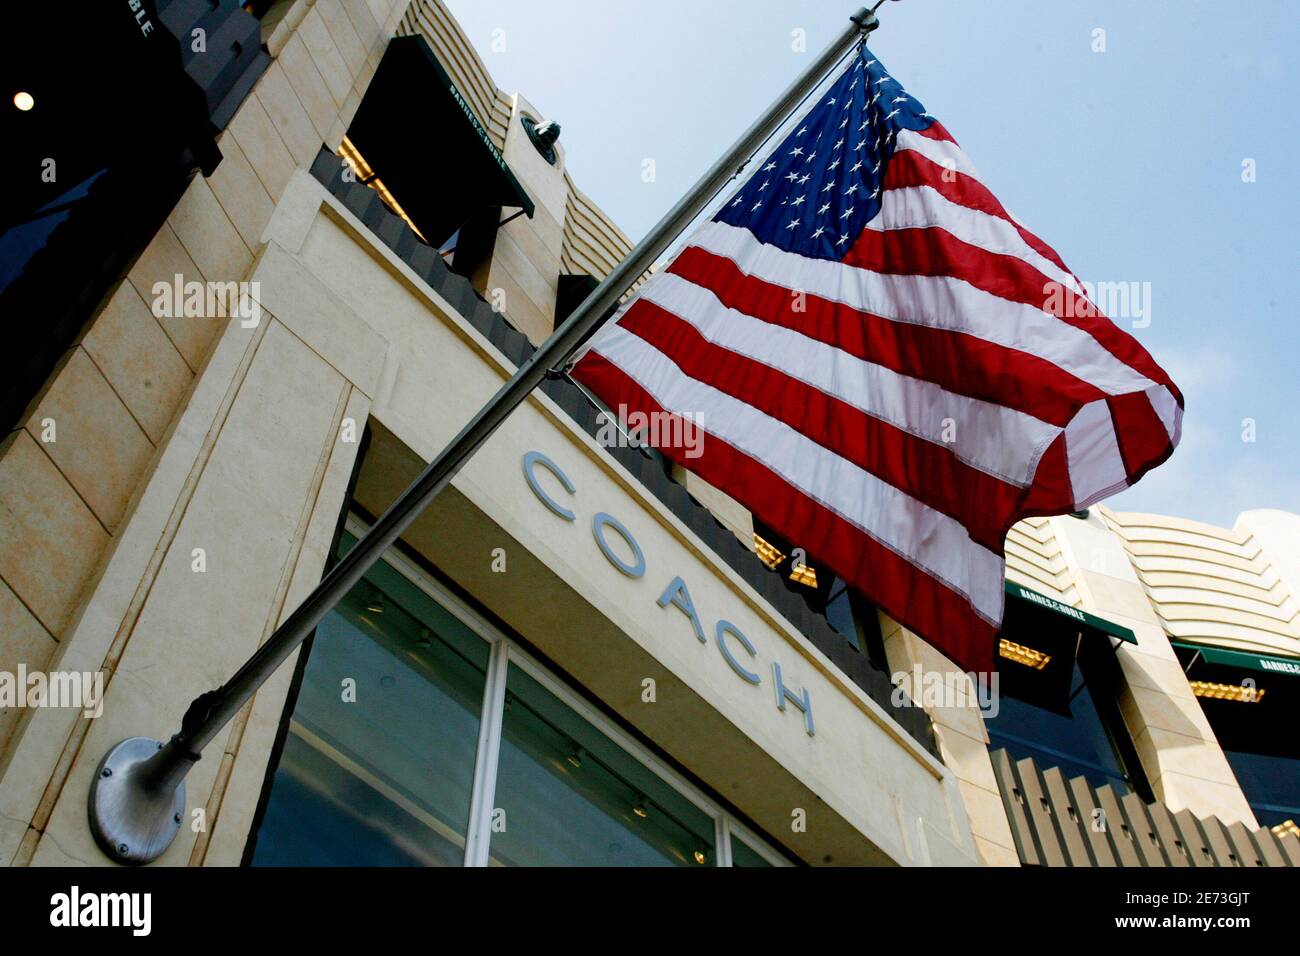 An American flag flies at a Coach Inc. full-price store in Los Angeles, California  July 29, 2008. Coach Inc reported higher quarterly profit on Tuesday in line with Wall Street estimates, and its shares rose as its outlook was not as bad as some analysts had feared. REUTERS/Fred Prouser        (UNITED STATES) Stock Photo